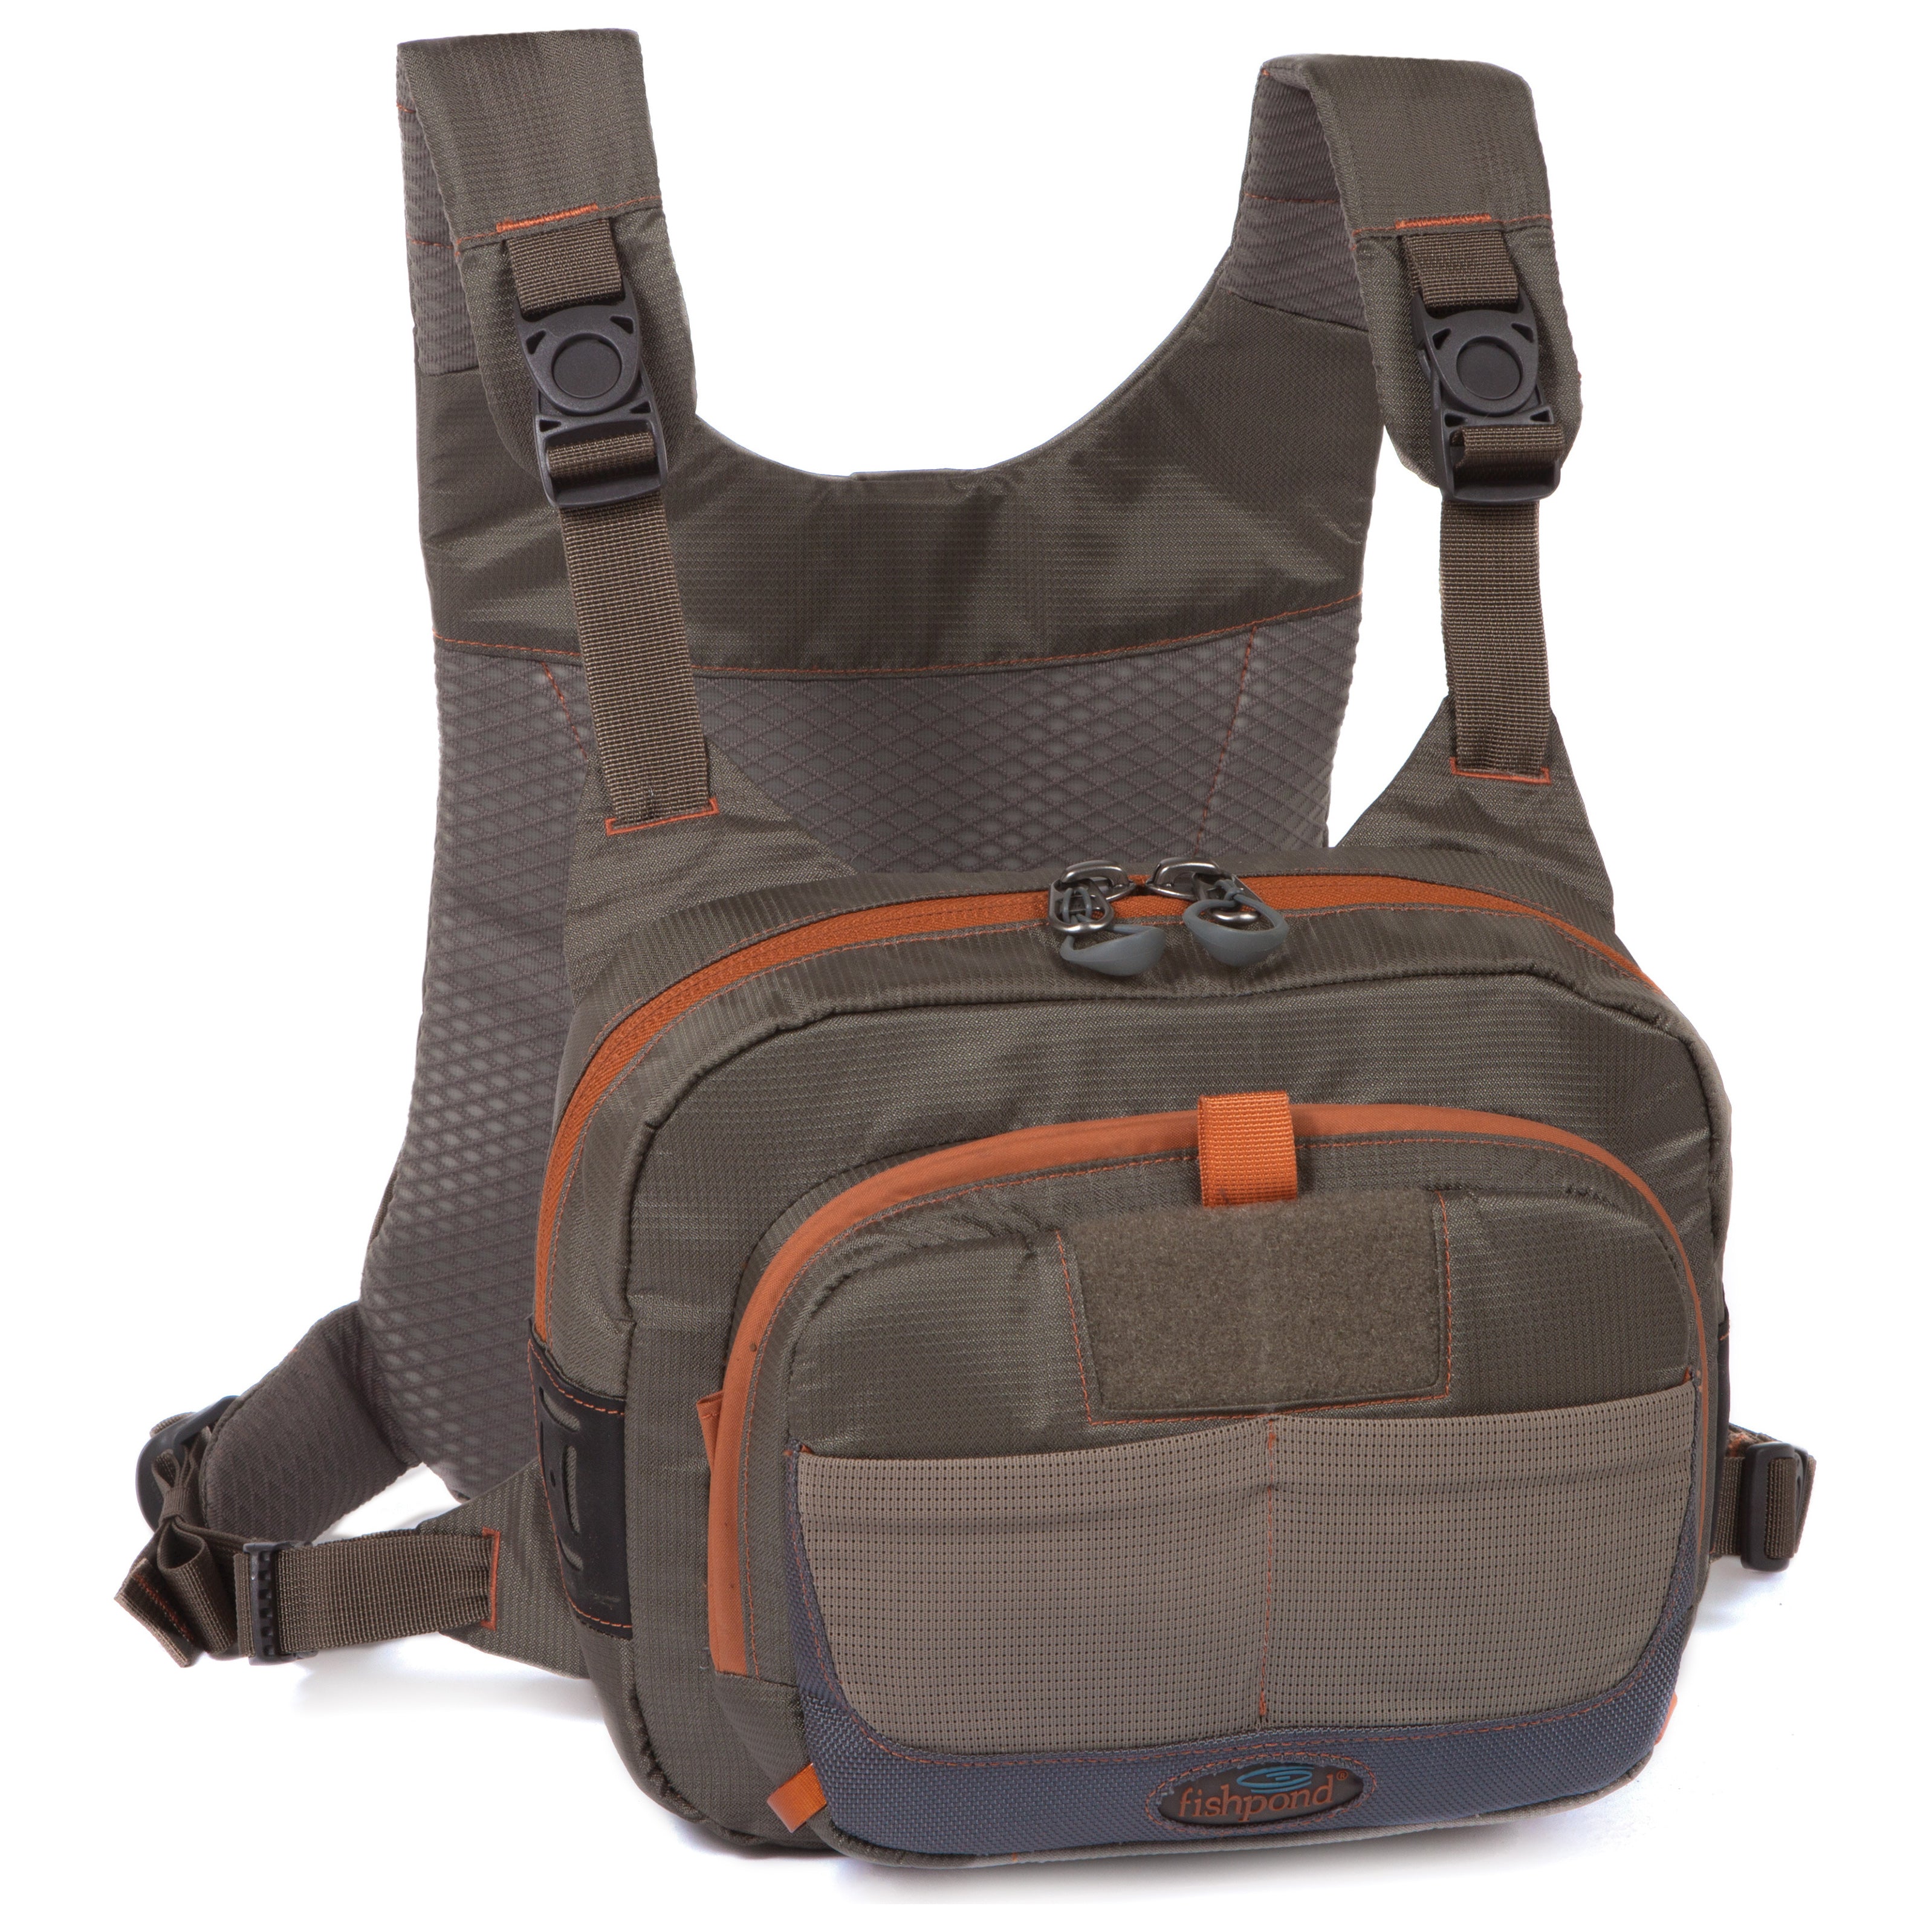 Fishpond Cross-Current Chest Pack Image 01